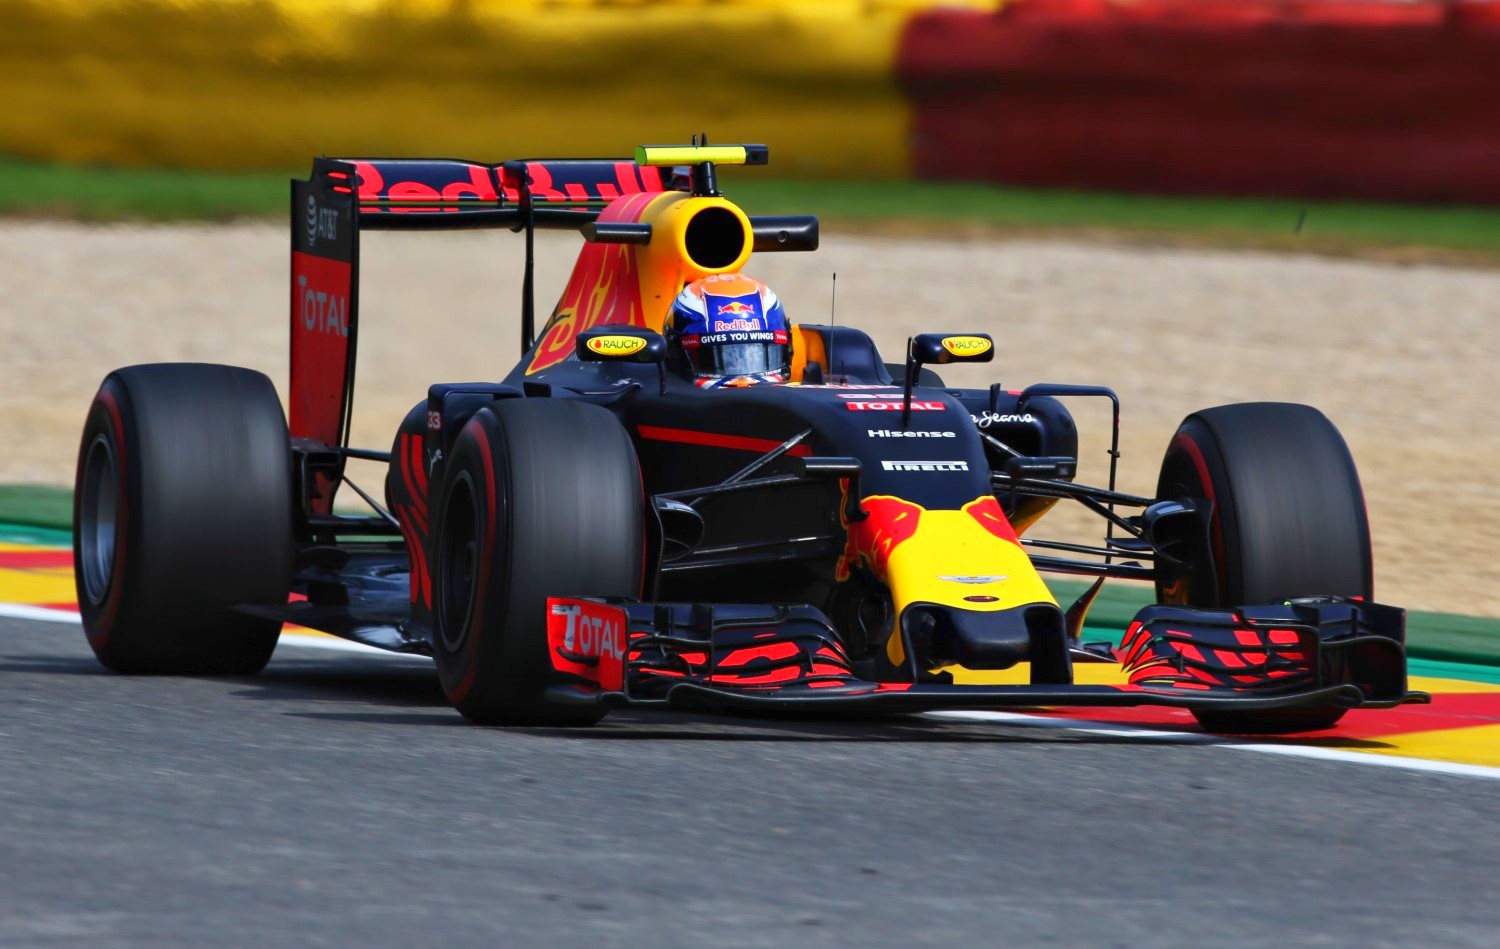 Verstappen panned, but give the youngster a break